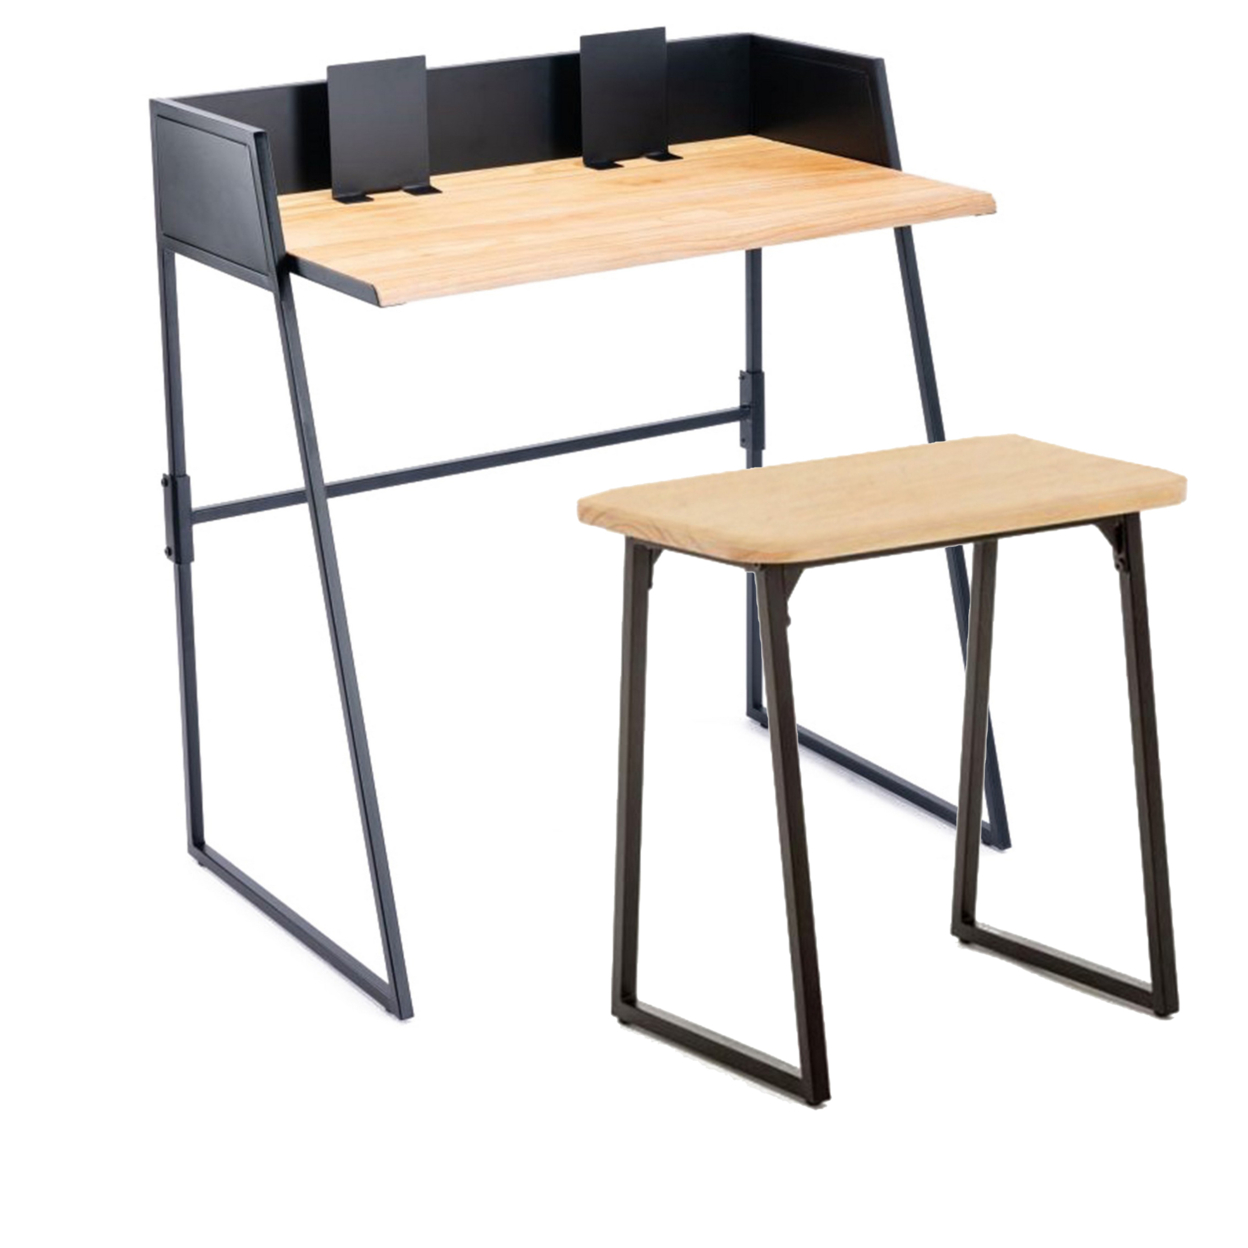 2 Piece Desk Set With Bench, Wood And Metal, Natural Brown And Black- Saltoro Sherpi